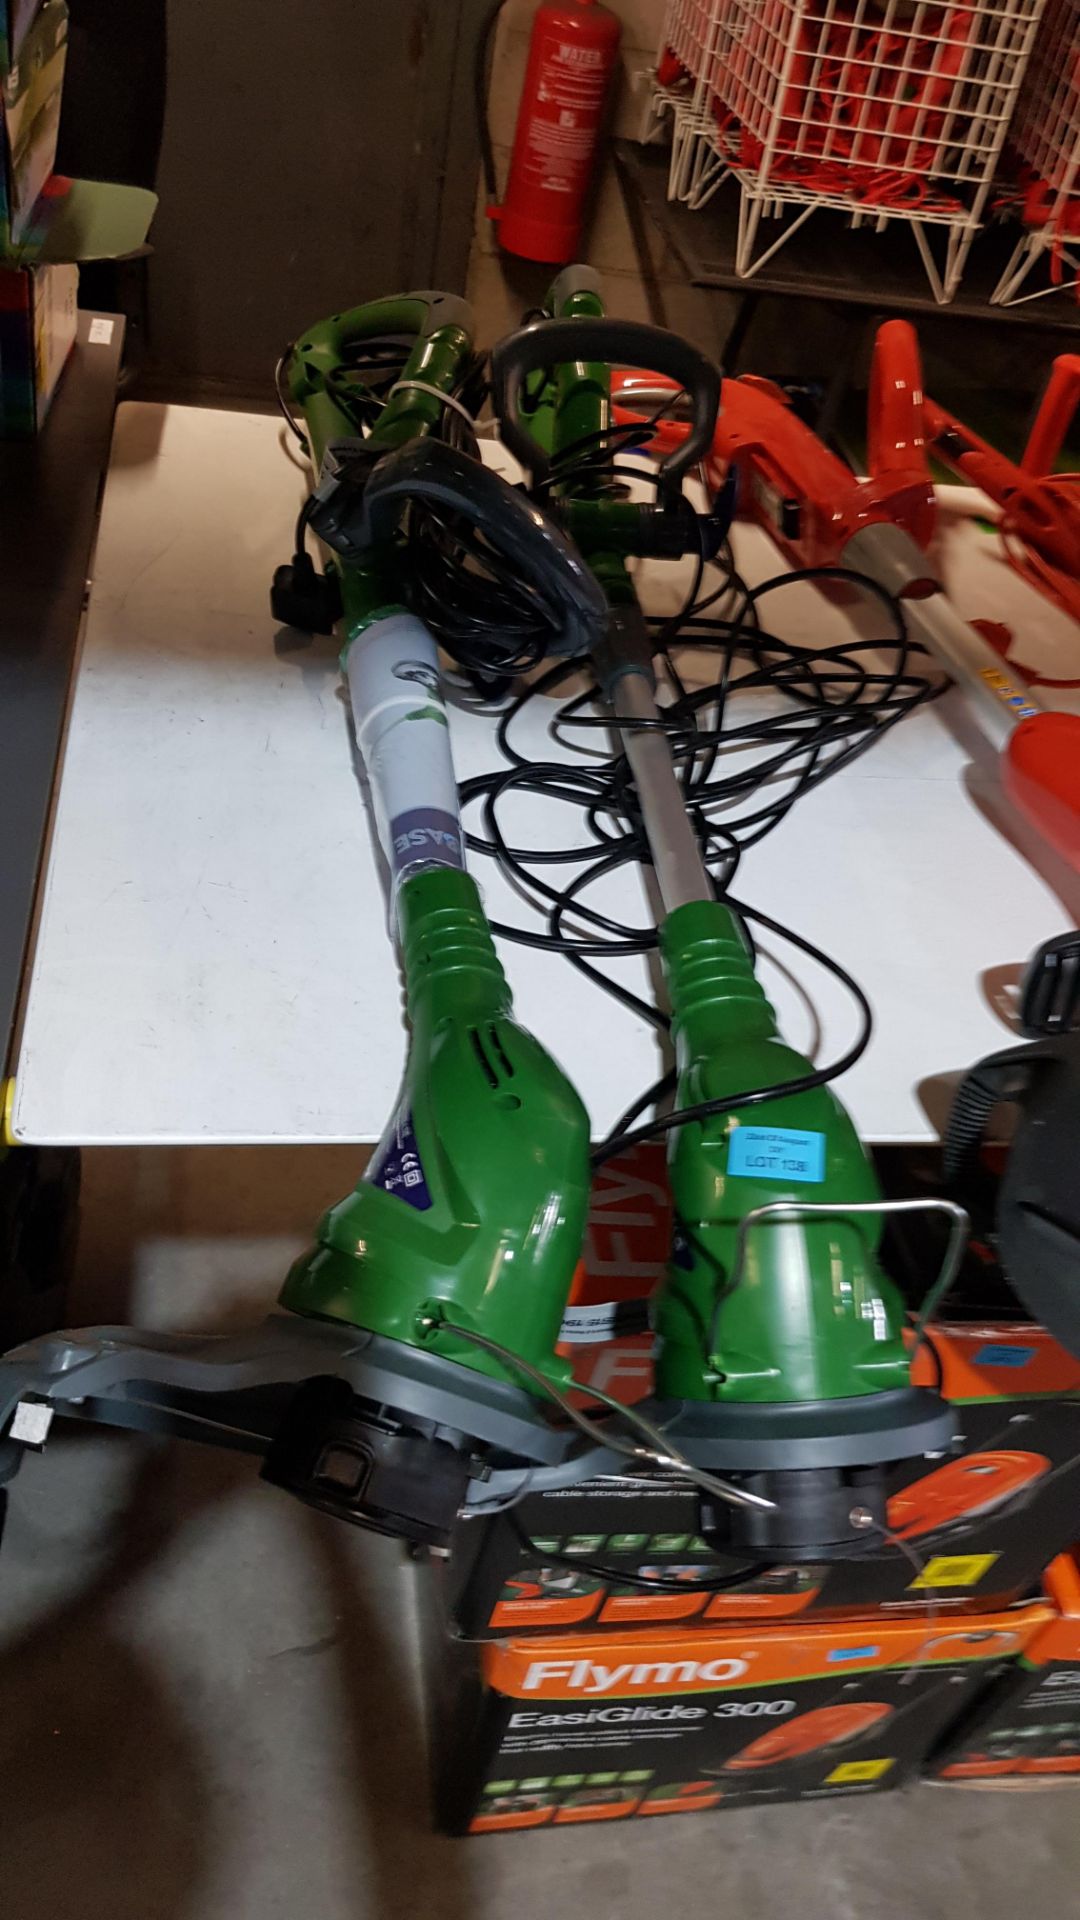 (R15A) 2x Powerbase Electric Grass Trimmer 450W. (Both Items Clean. Appears As New). - Image 3 of 3